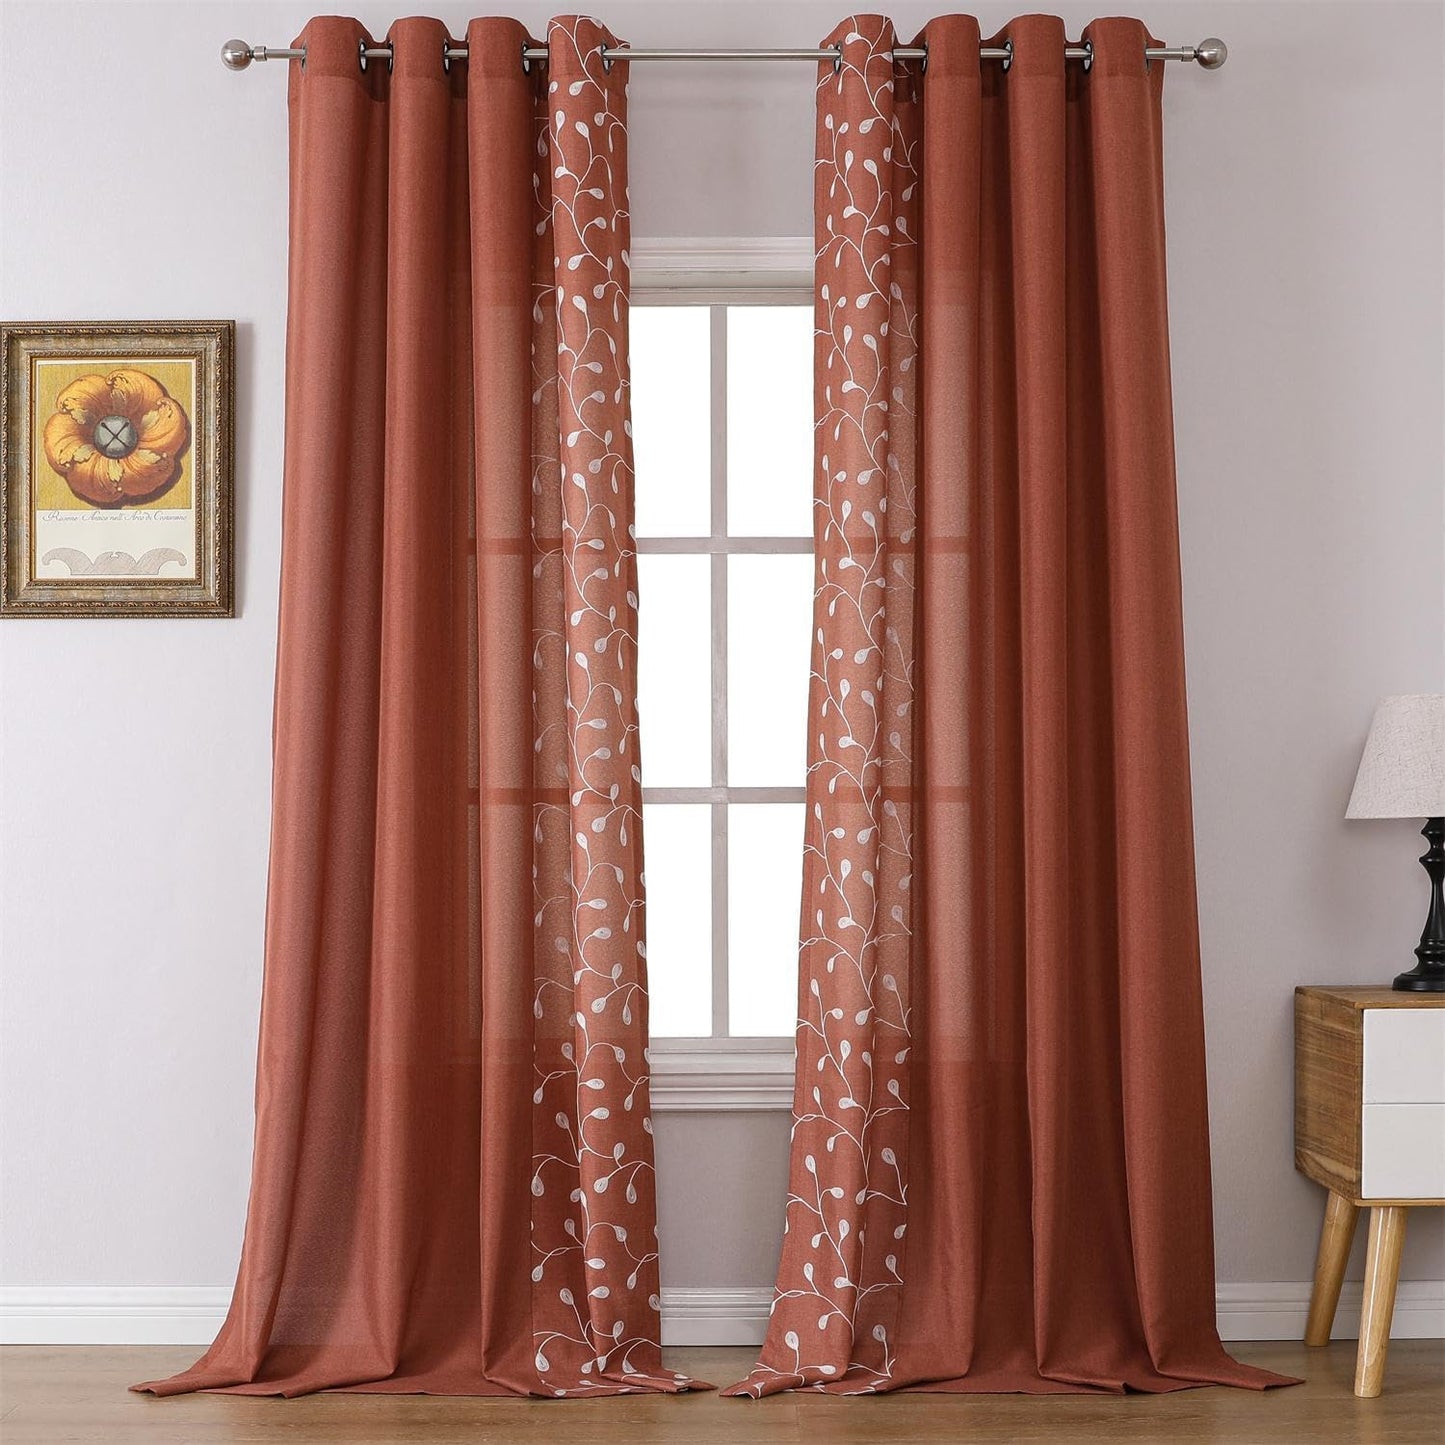 MIUCO Floral Embroidered Semi Sheer Curtains Faux Linen Grommet Curtains for Girls Room 52 X 84 Inch Set of 2, off White  MIUCO Mix  Match - Rust 52X84 Inch 